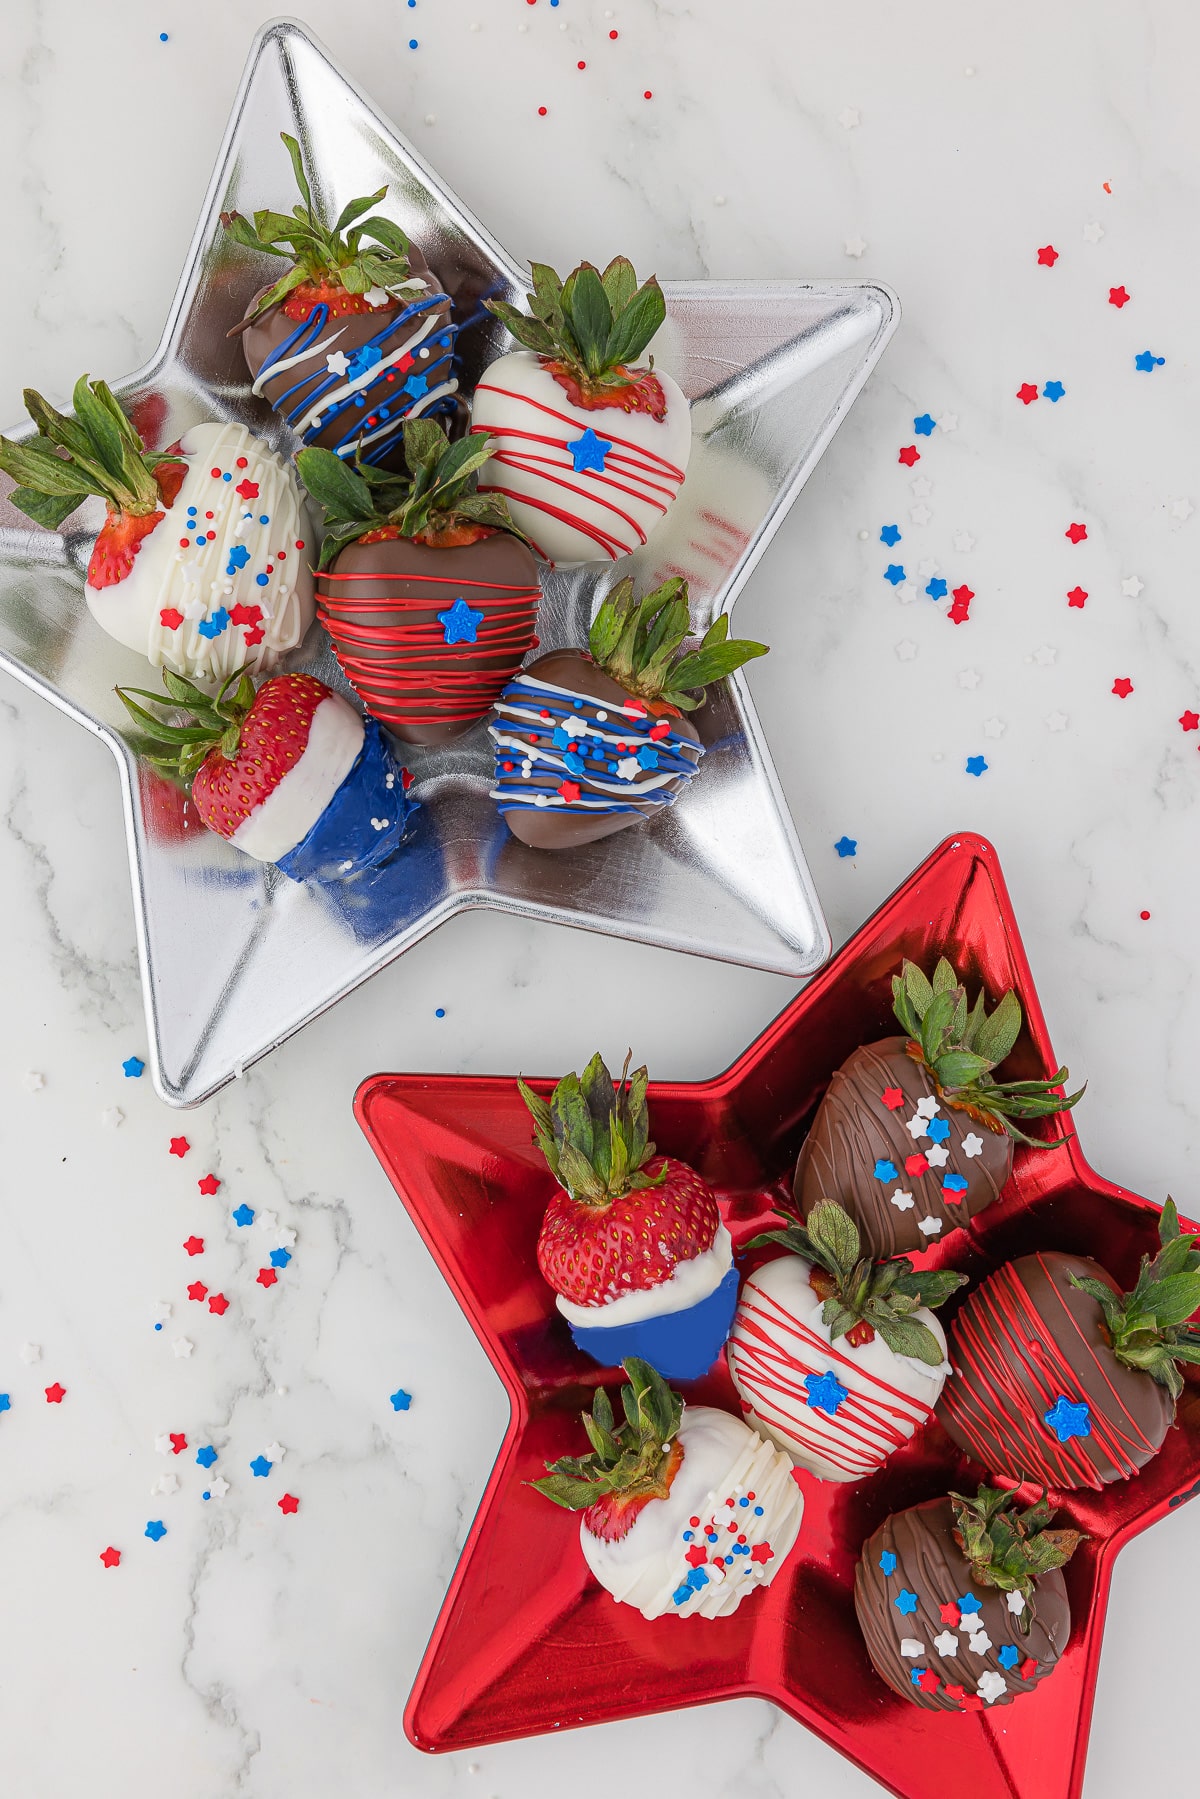 A red star-shaped plate and a silver star-shaped plate, each with 6 strawberries covered in white or dark chocolate and red, white and blue edible sprinkles, stars and stripes.